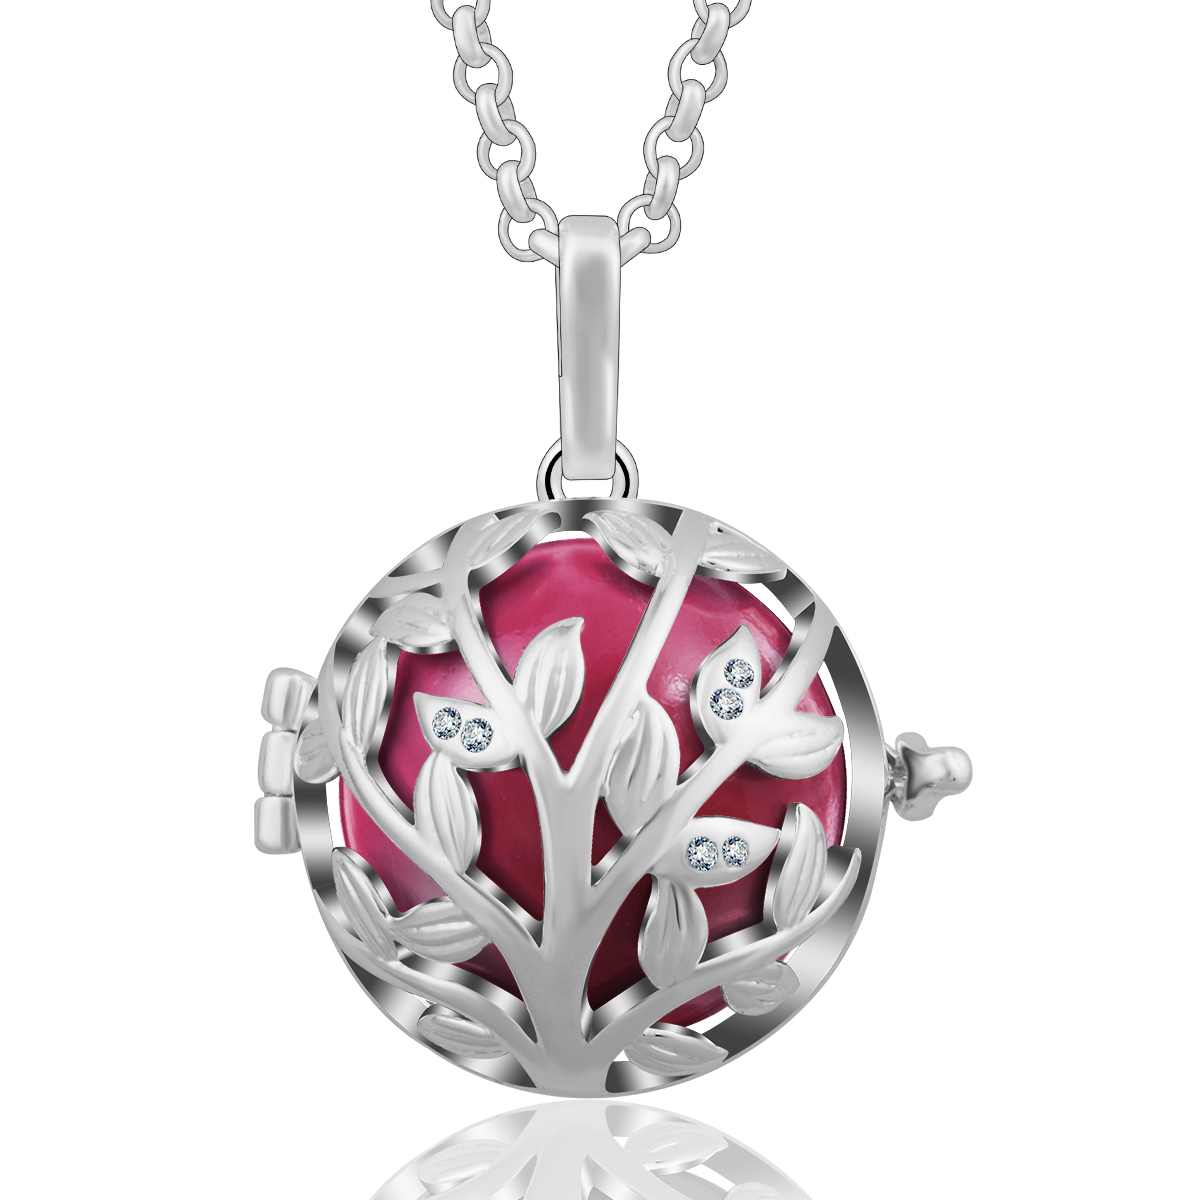 Silver Zircon Tree of Life Harmony Bola Color Chime Ball Cage Pendant